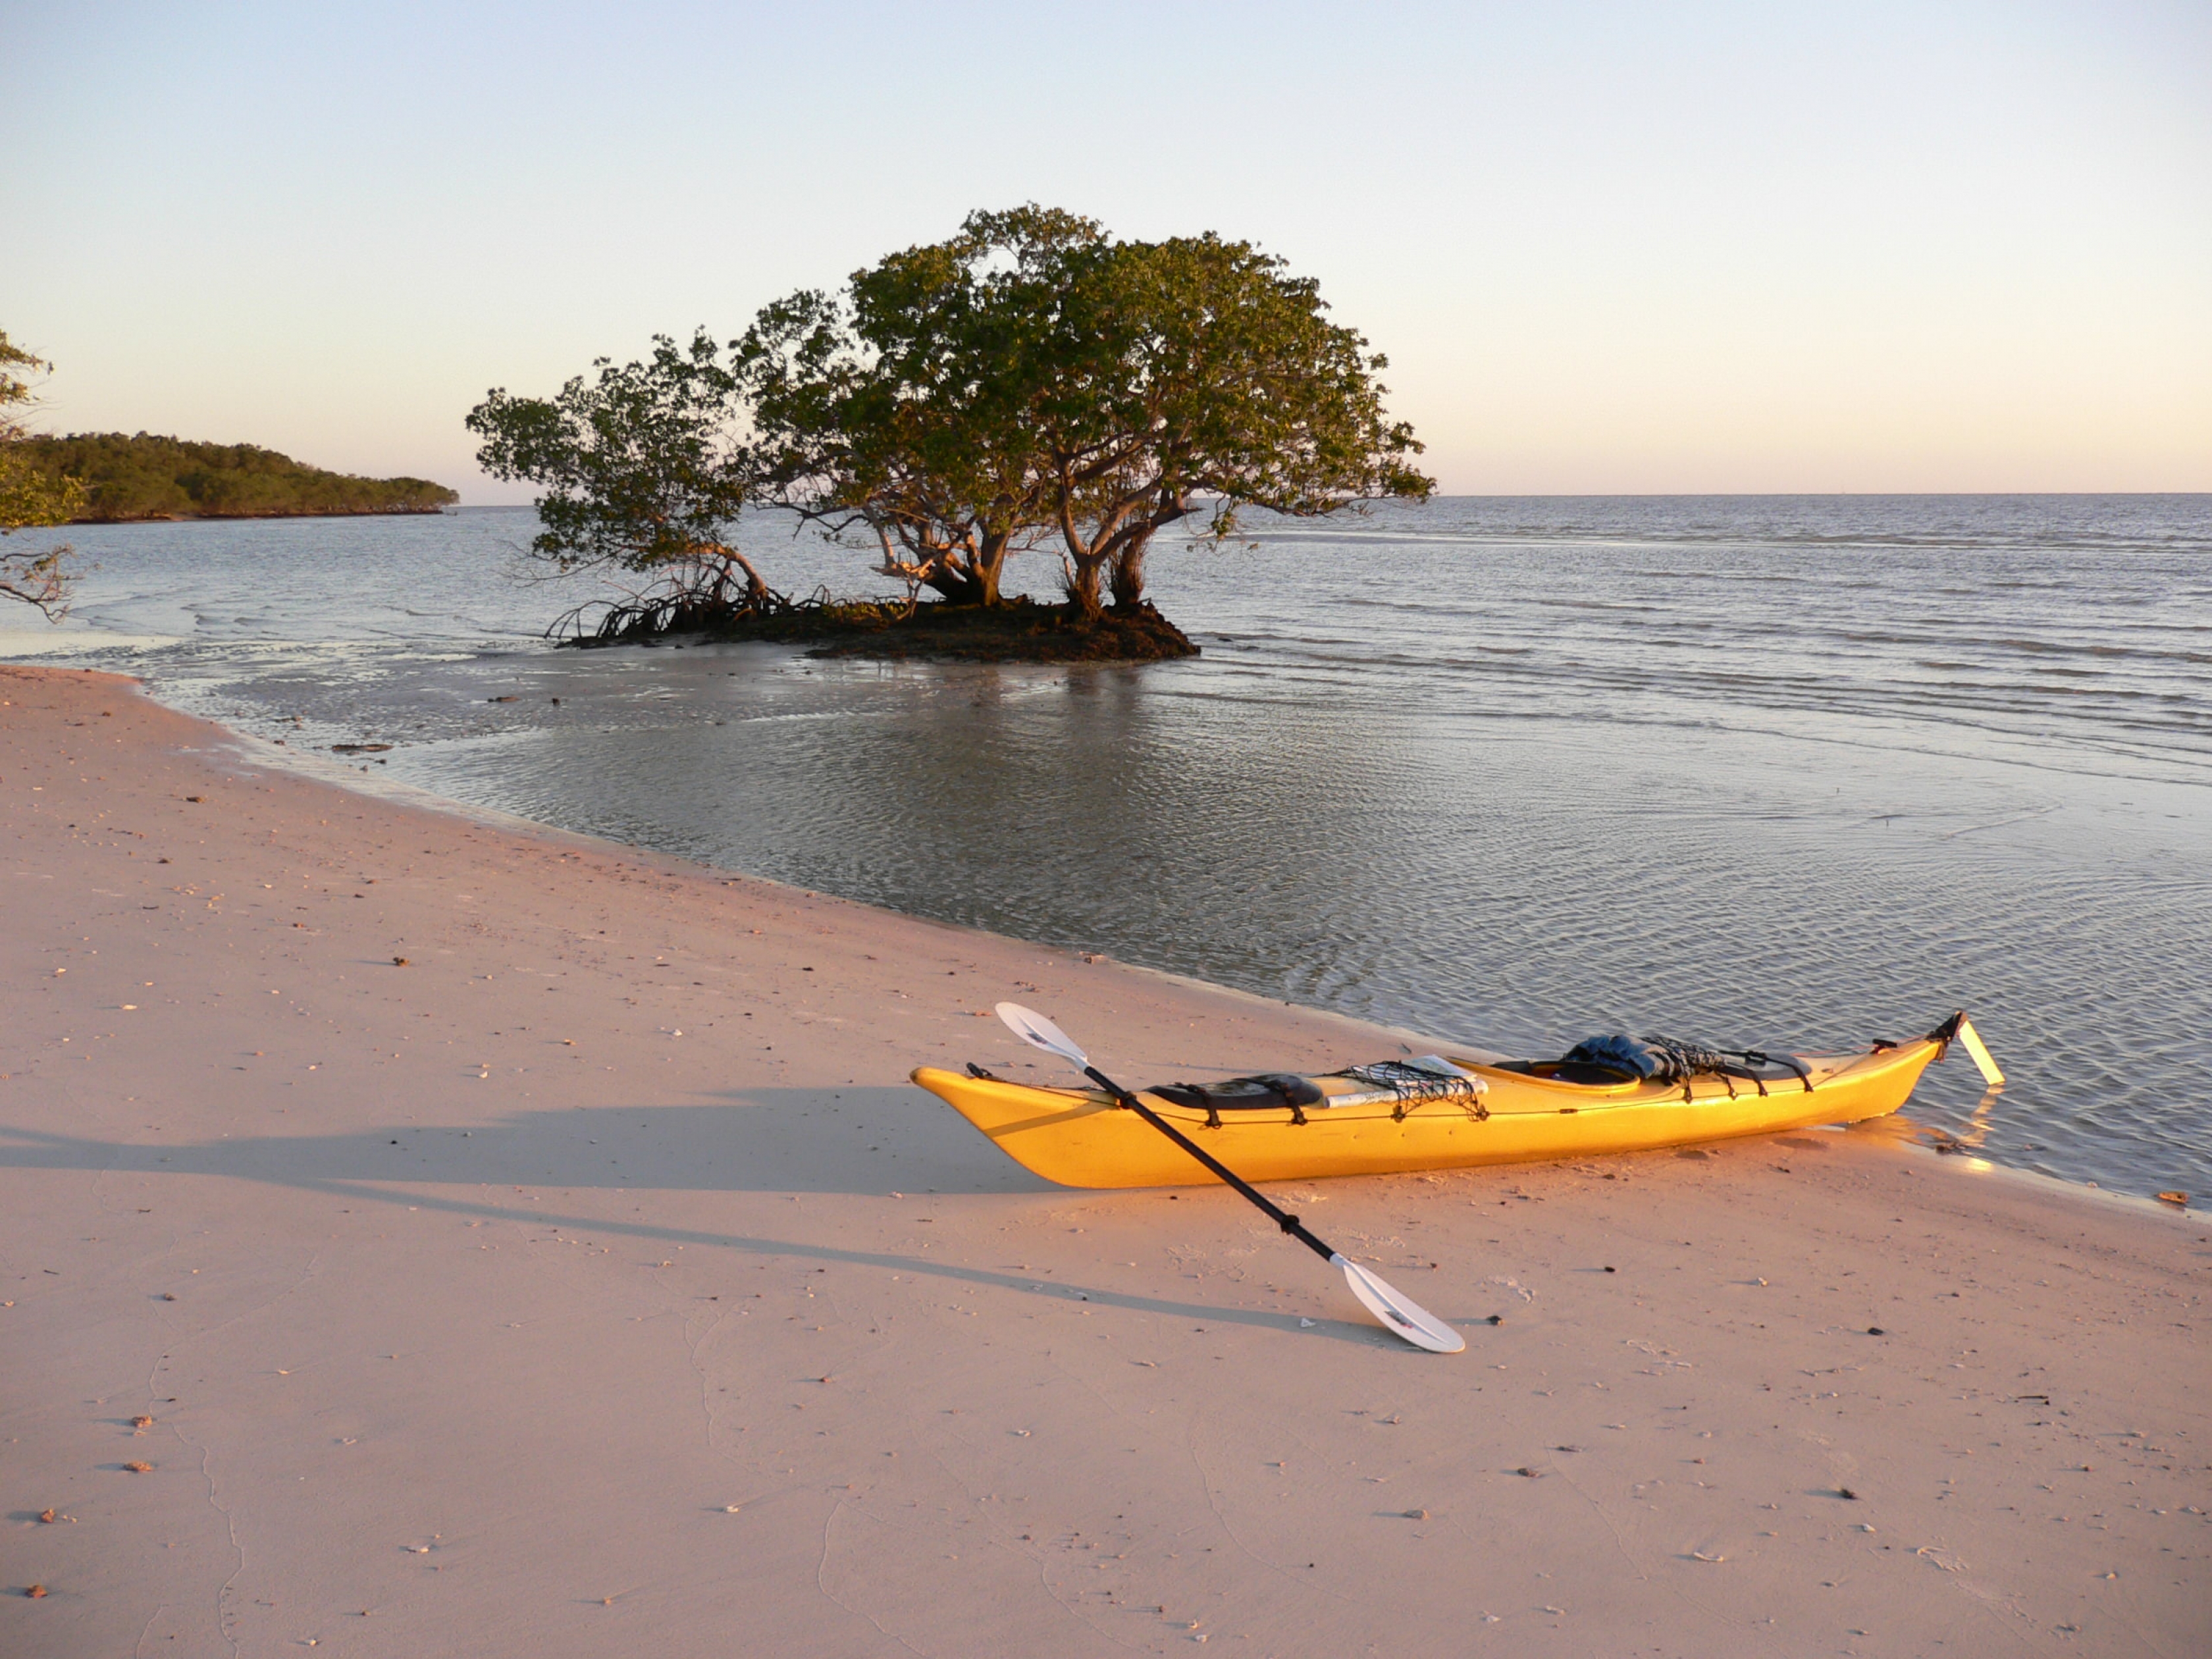 A kayak on the beach in Everglades at Tiger Key.